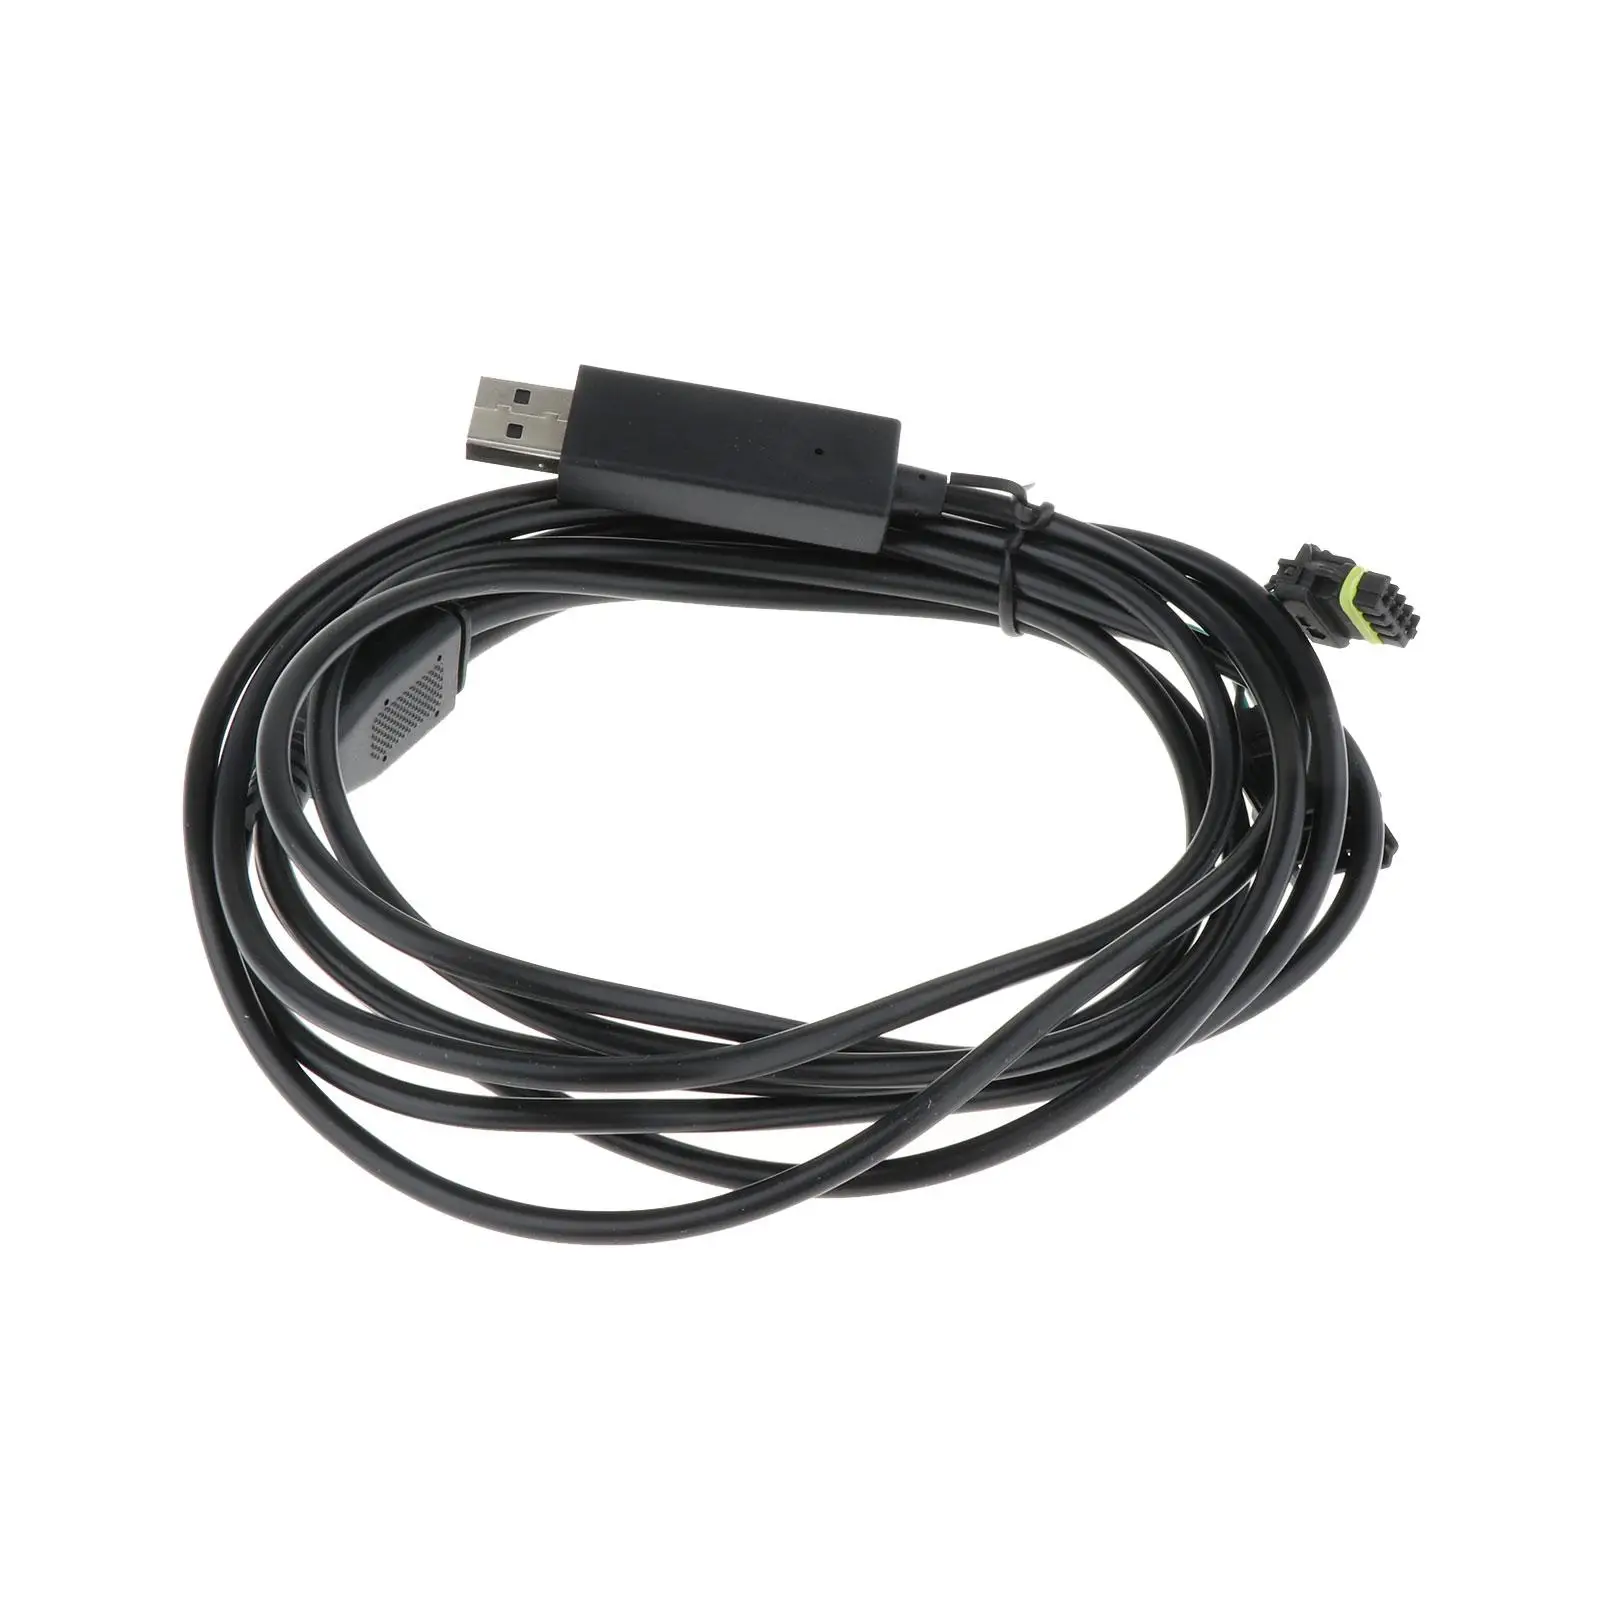 USB Can Cable 558-443-2 Repair Accessories Double Ended Plug and Play Wiring Harness for Holley Efi Sniper Efi Erminator x